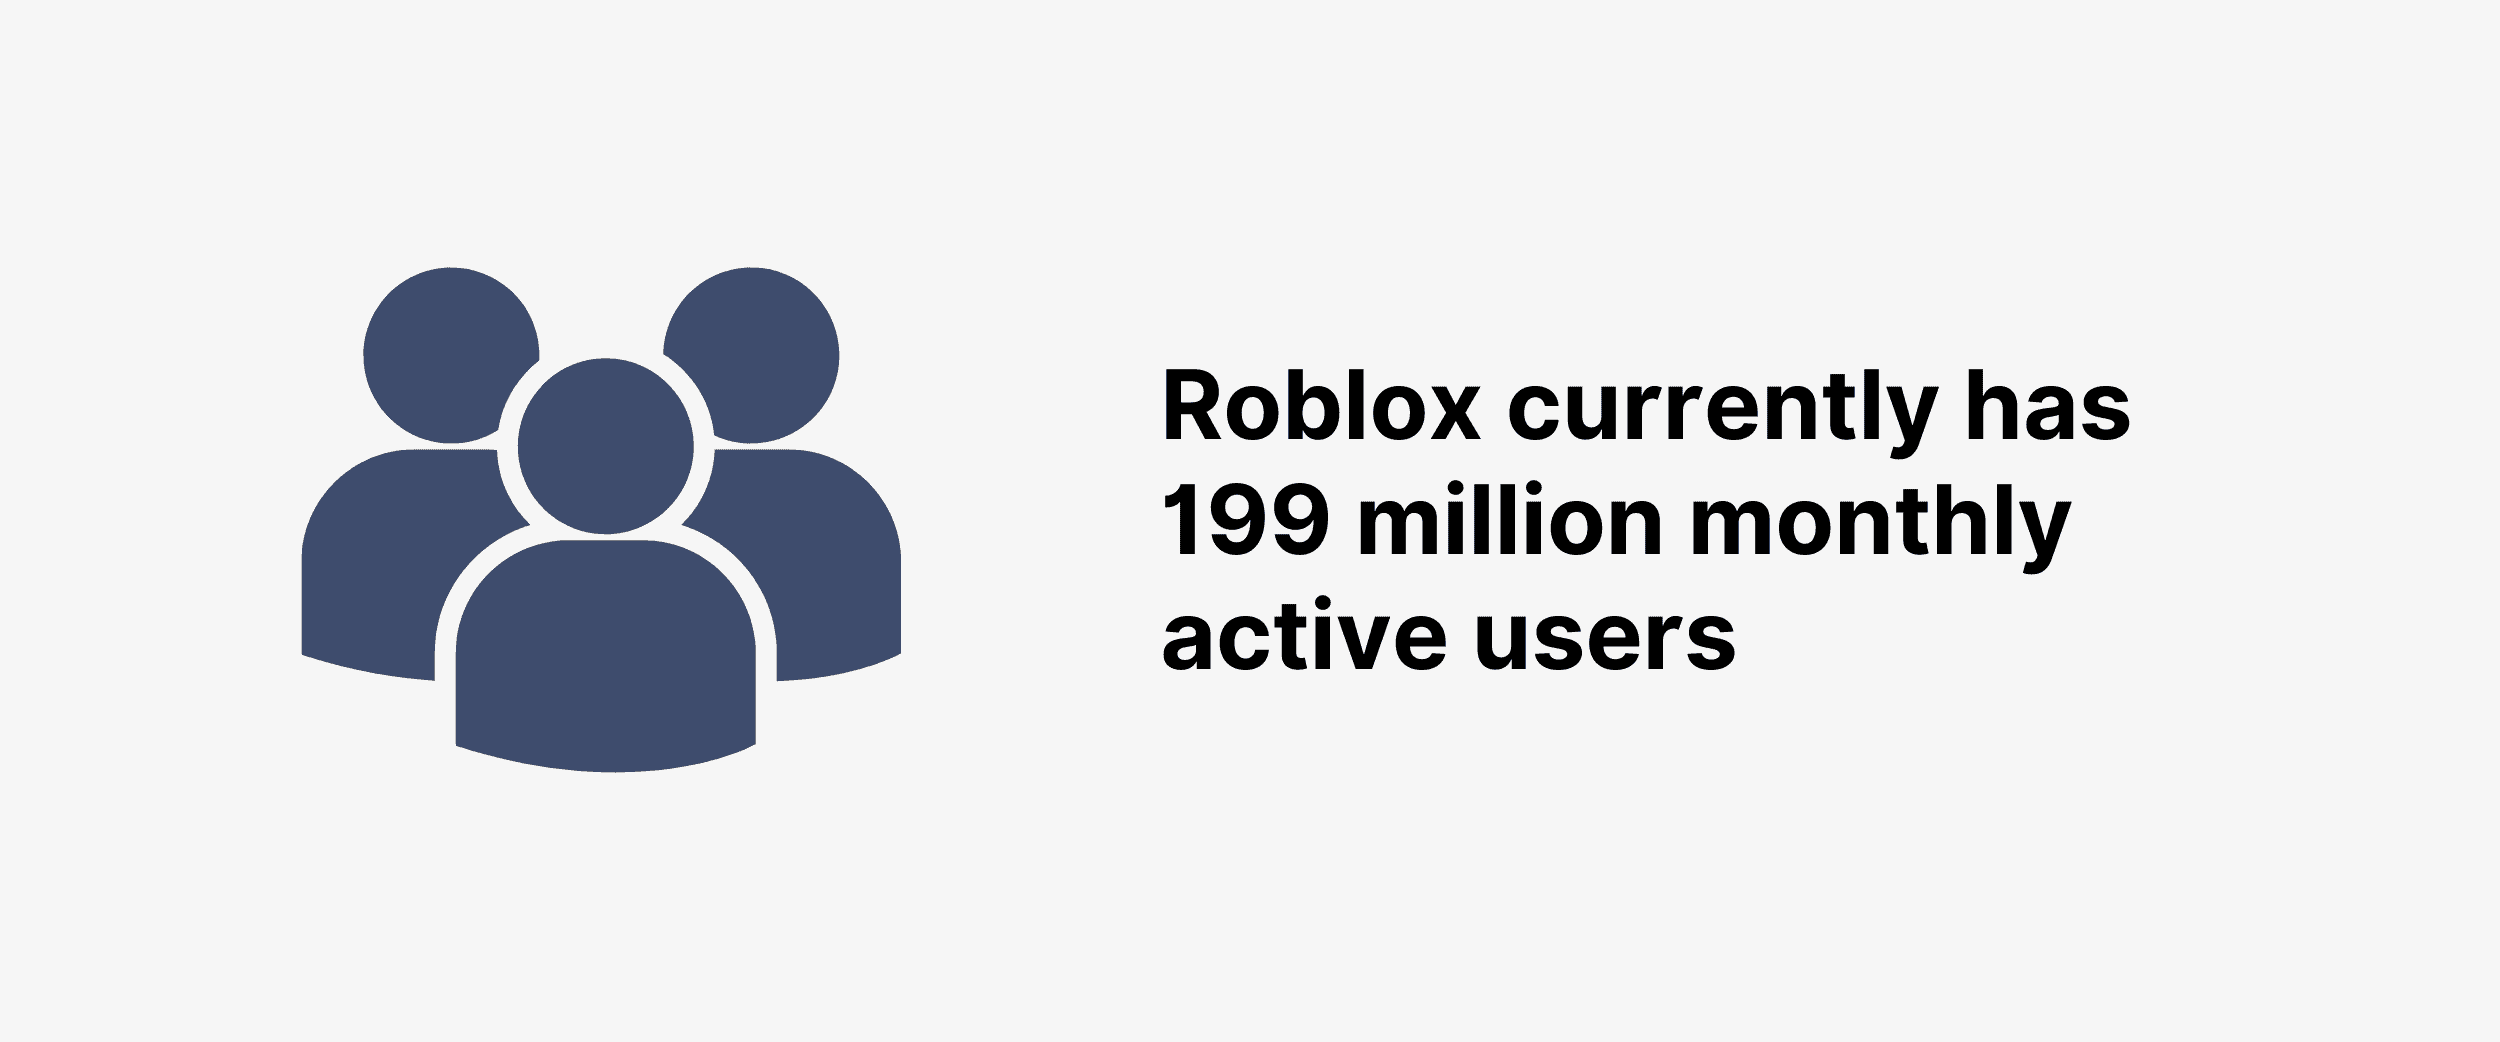 Roblox currently has 199 million monthly active users